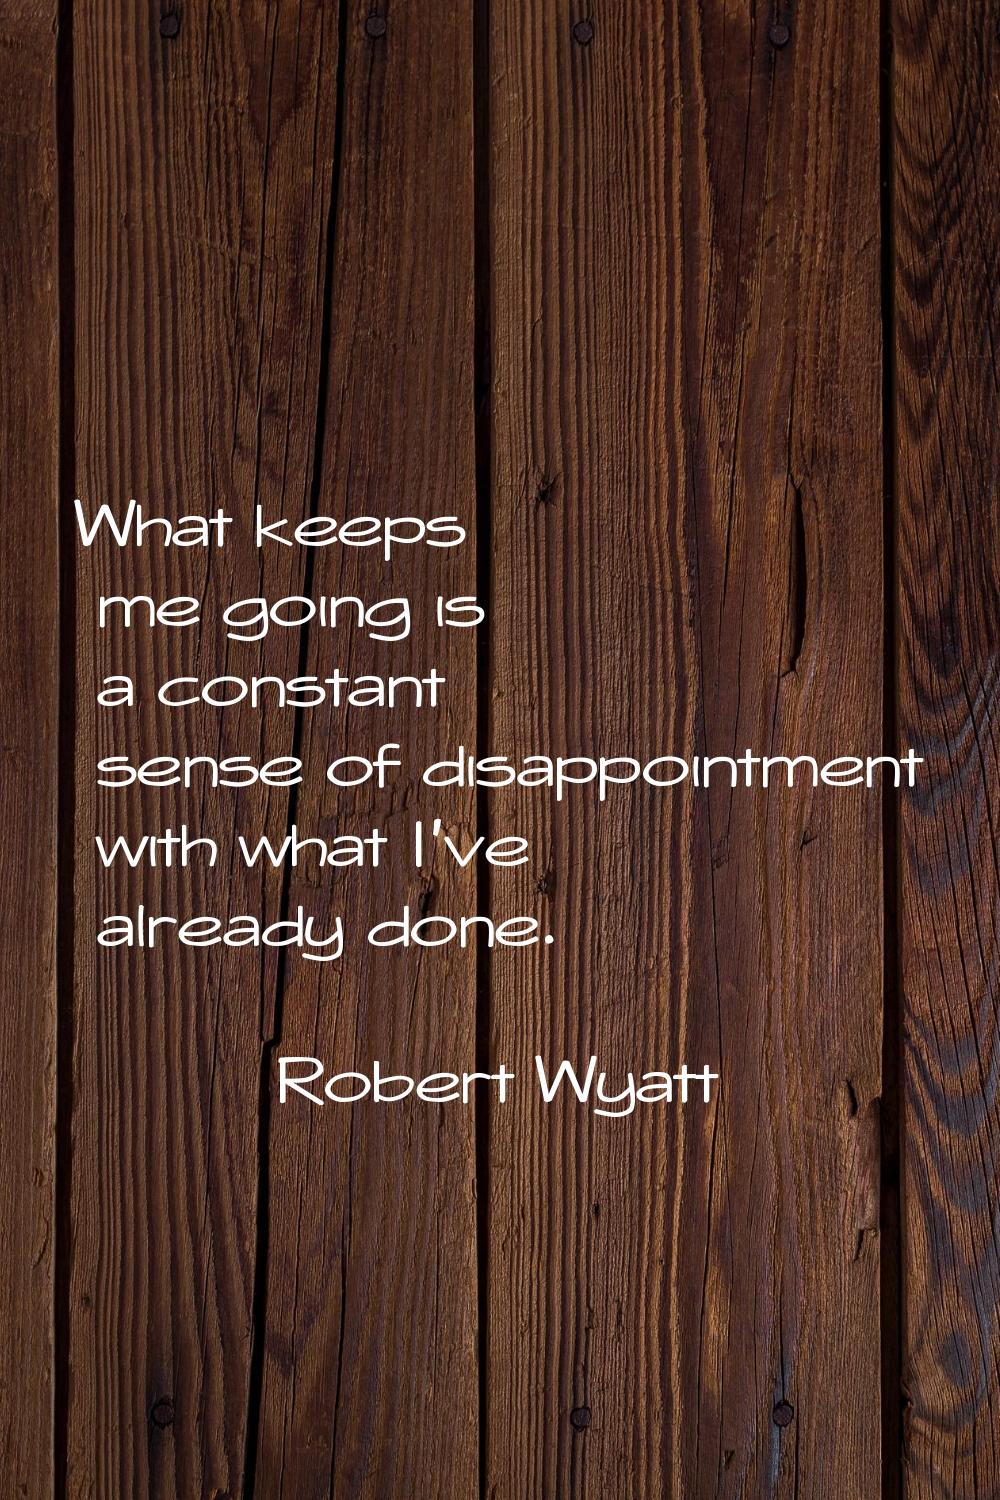 What keeps me going is a constant sense of disappointment with what I've already done.